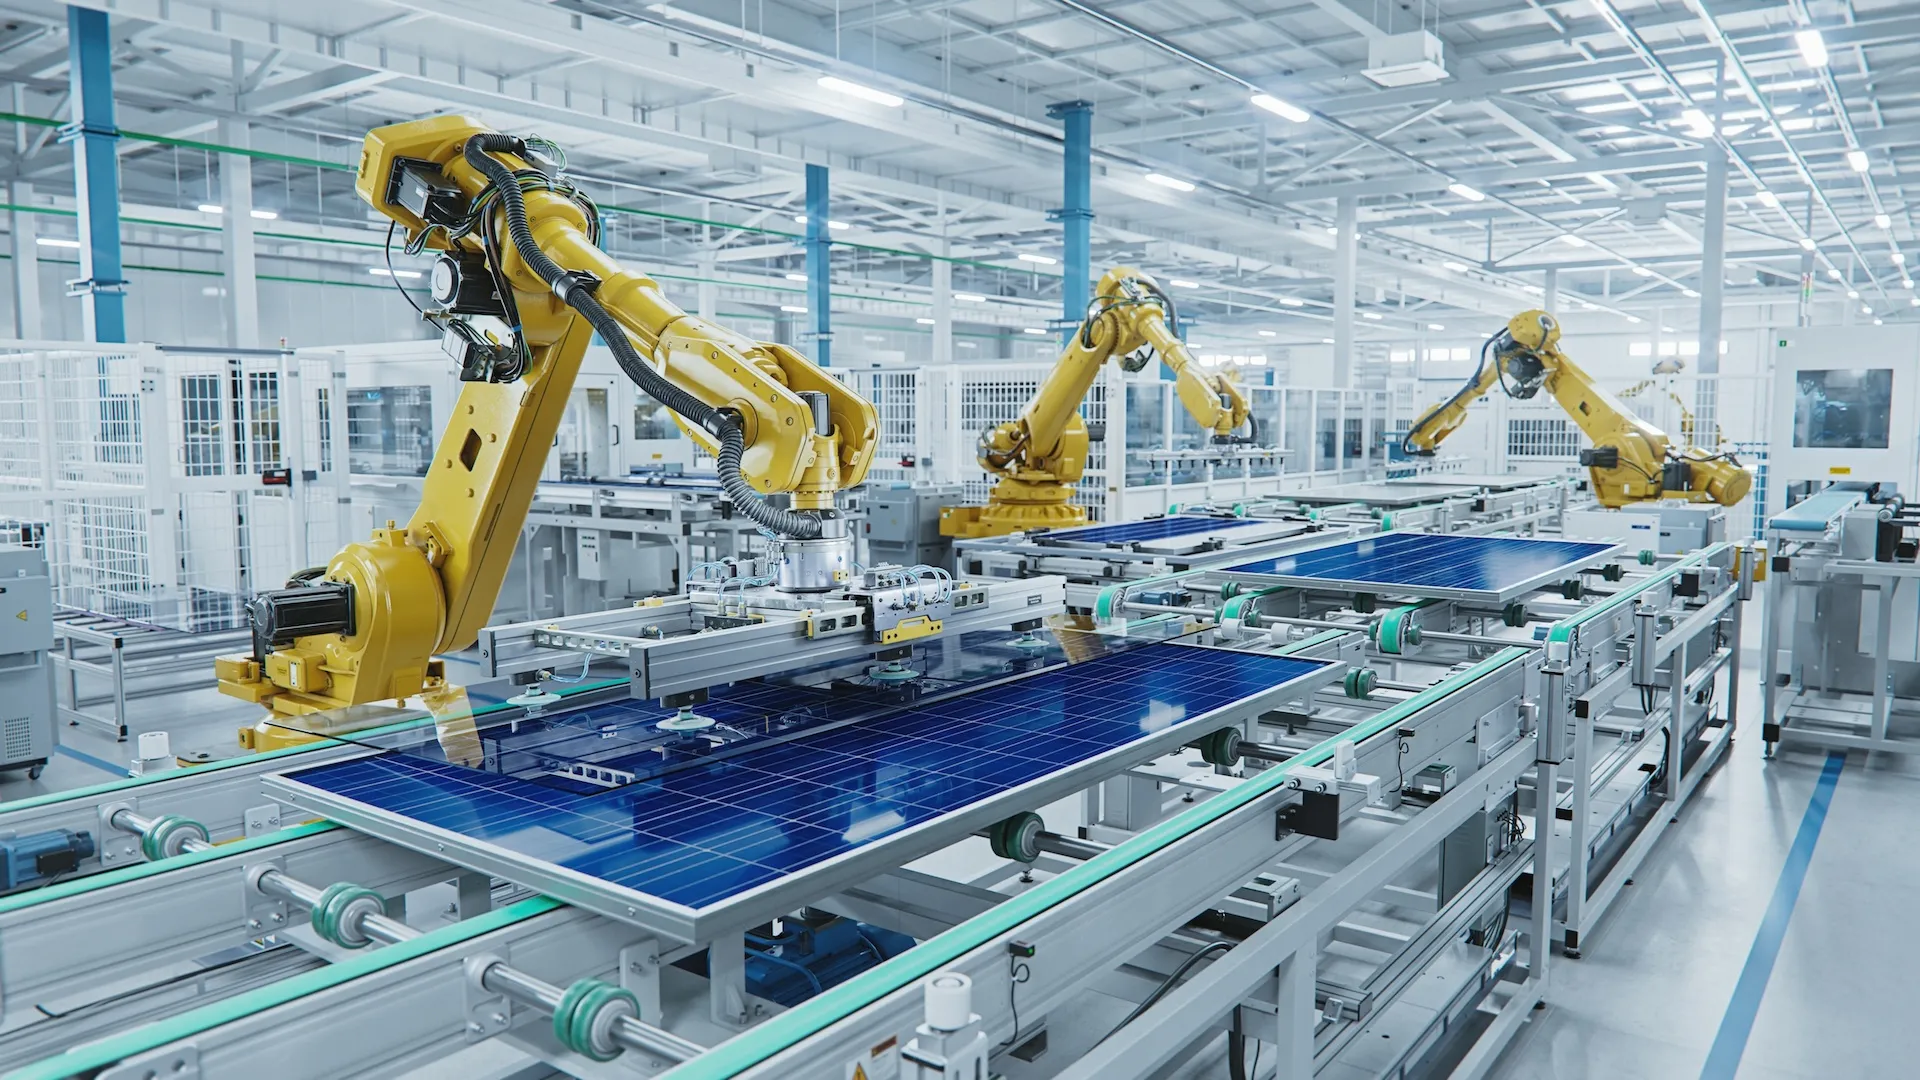 Discrete Manufacturing Large Production Line with Industrial Robot Arms at Modern Bright Factory. Solar Panels are being Assembled on Conveyor.